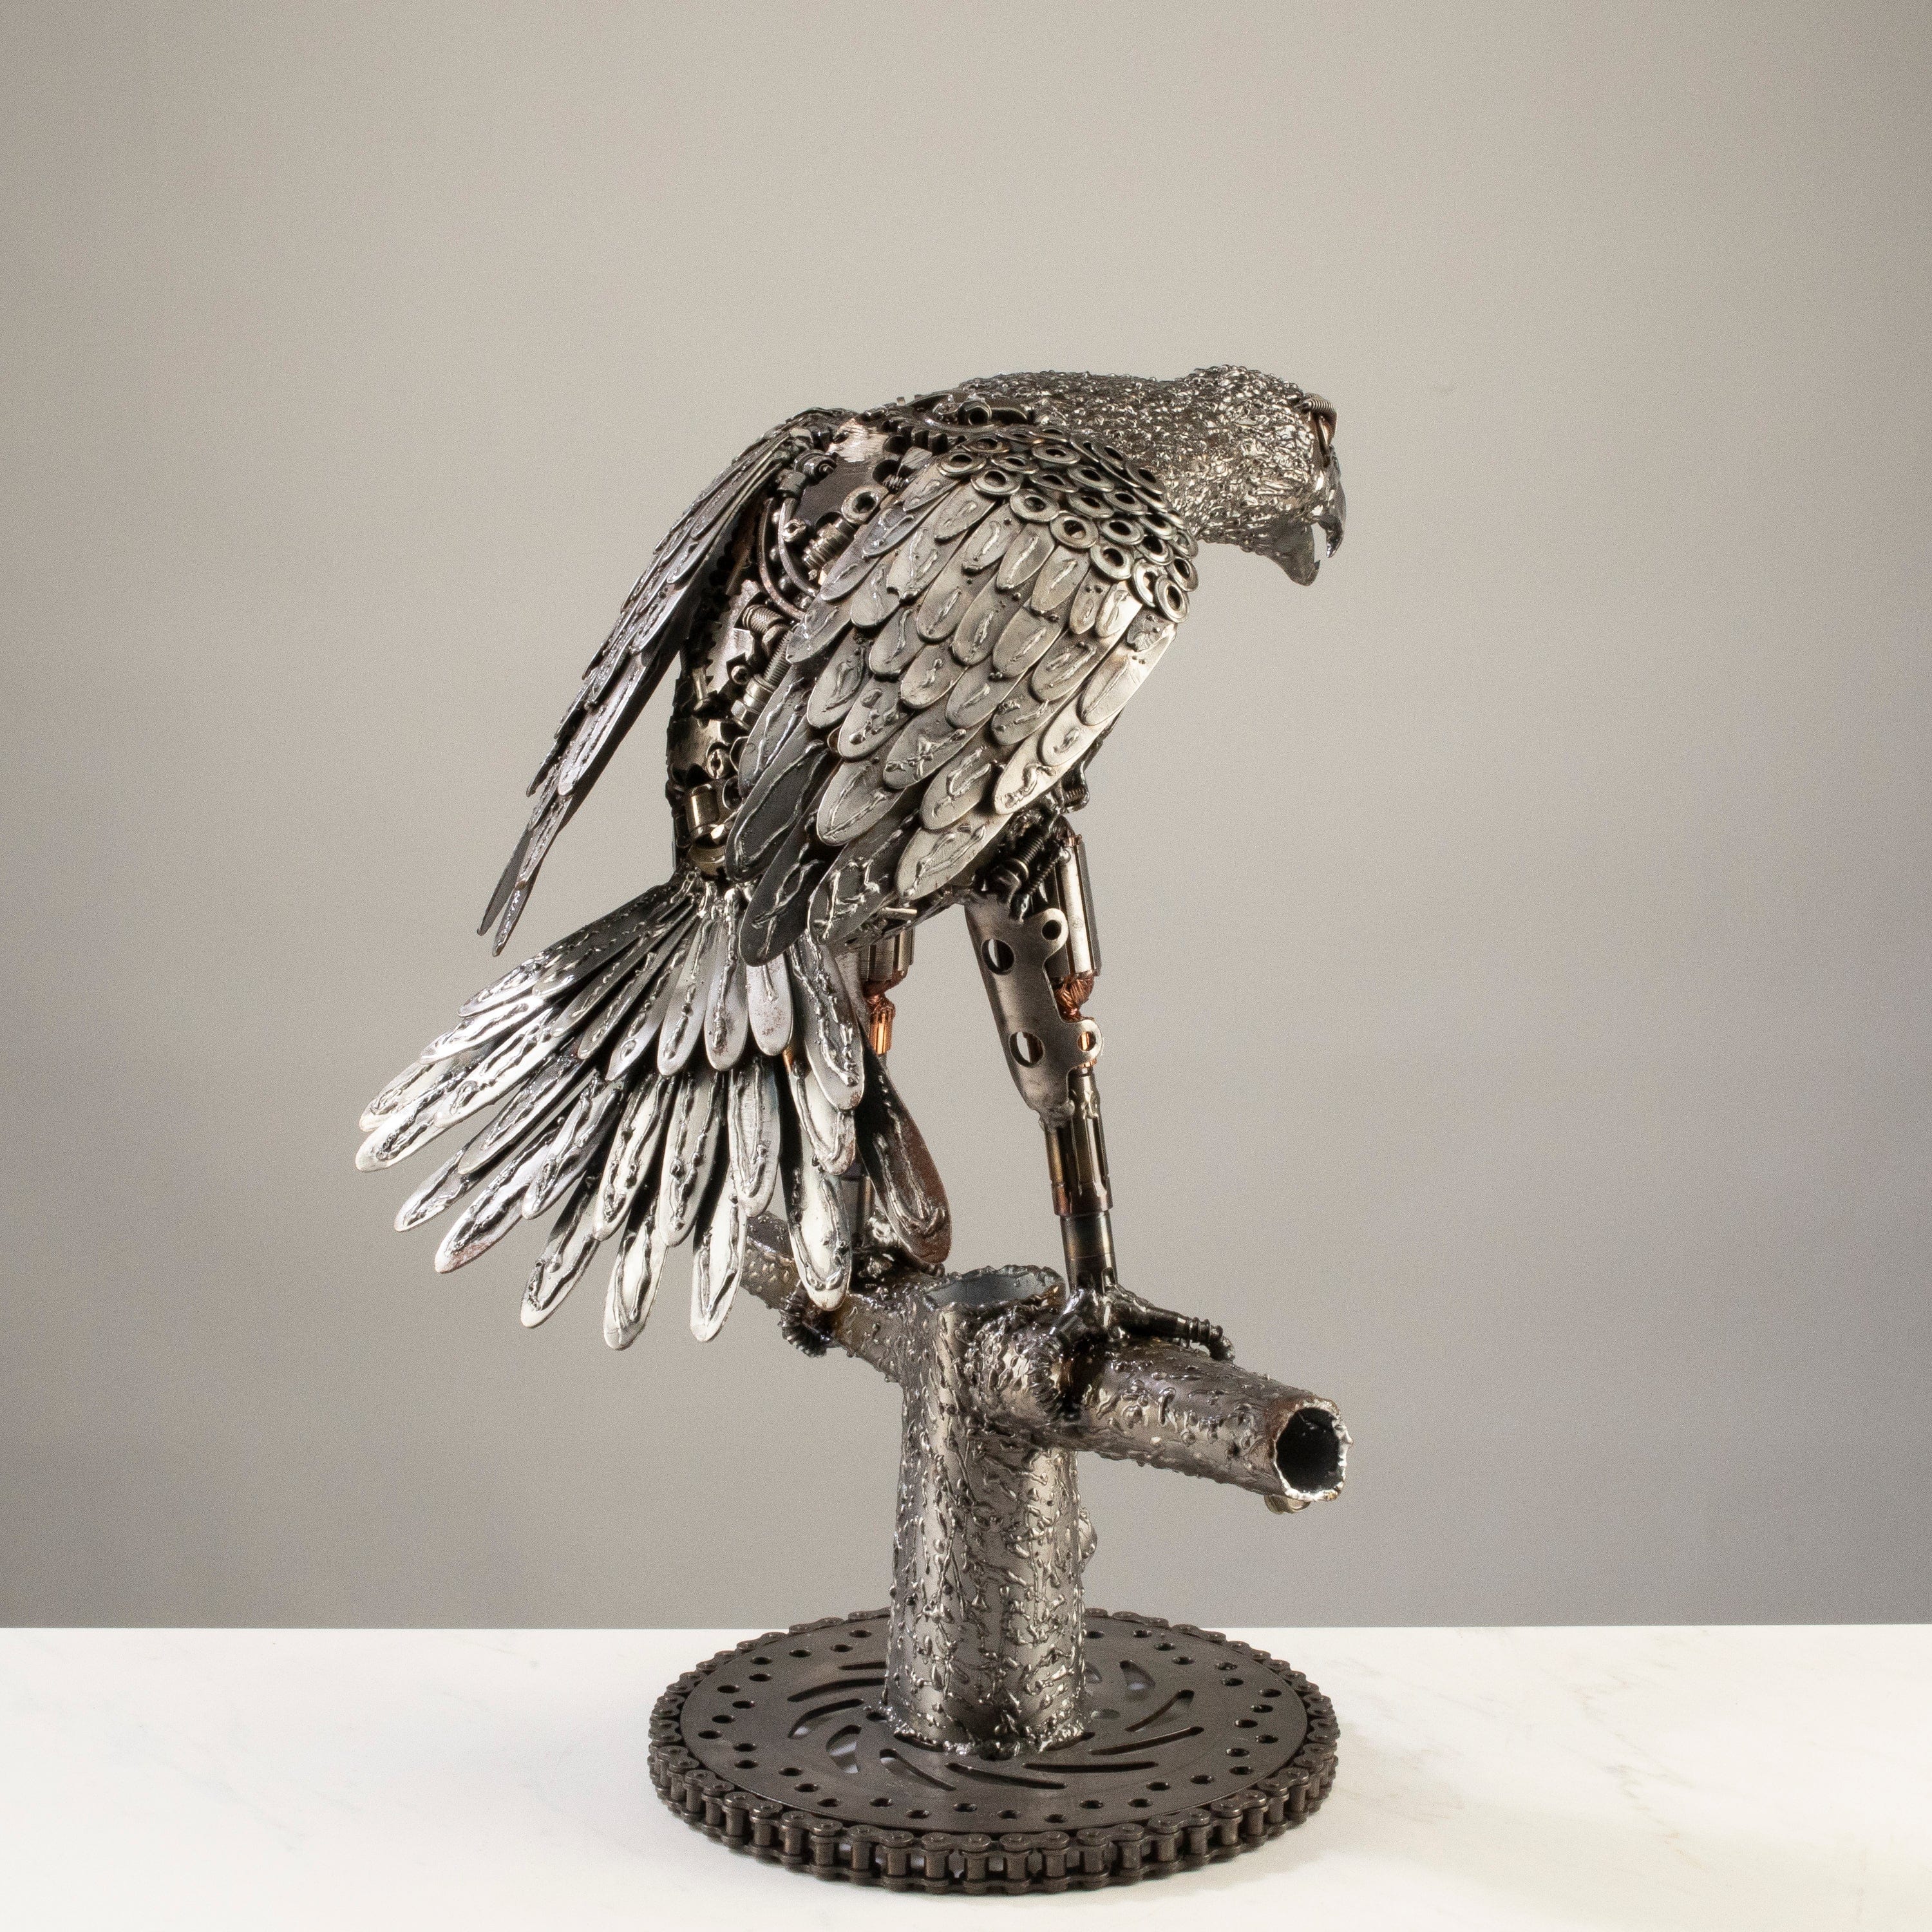 KALIFANO Recycled Metal Art 19" Eagle Recycled Metal Art Sculpture RMS-EAG30X24-PK